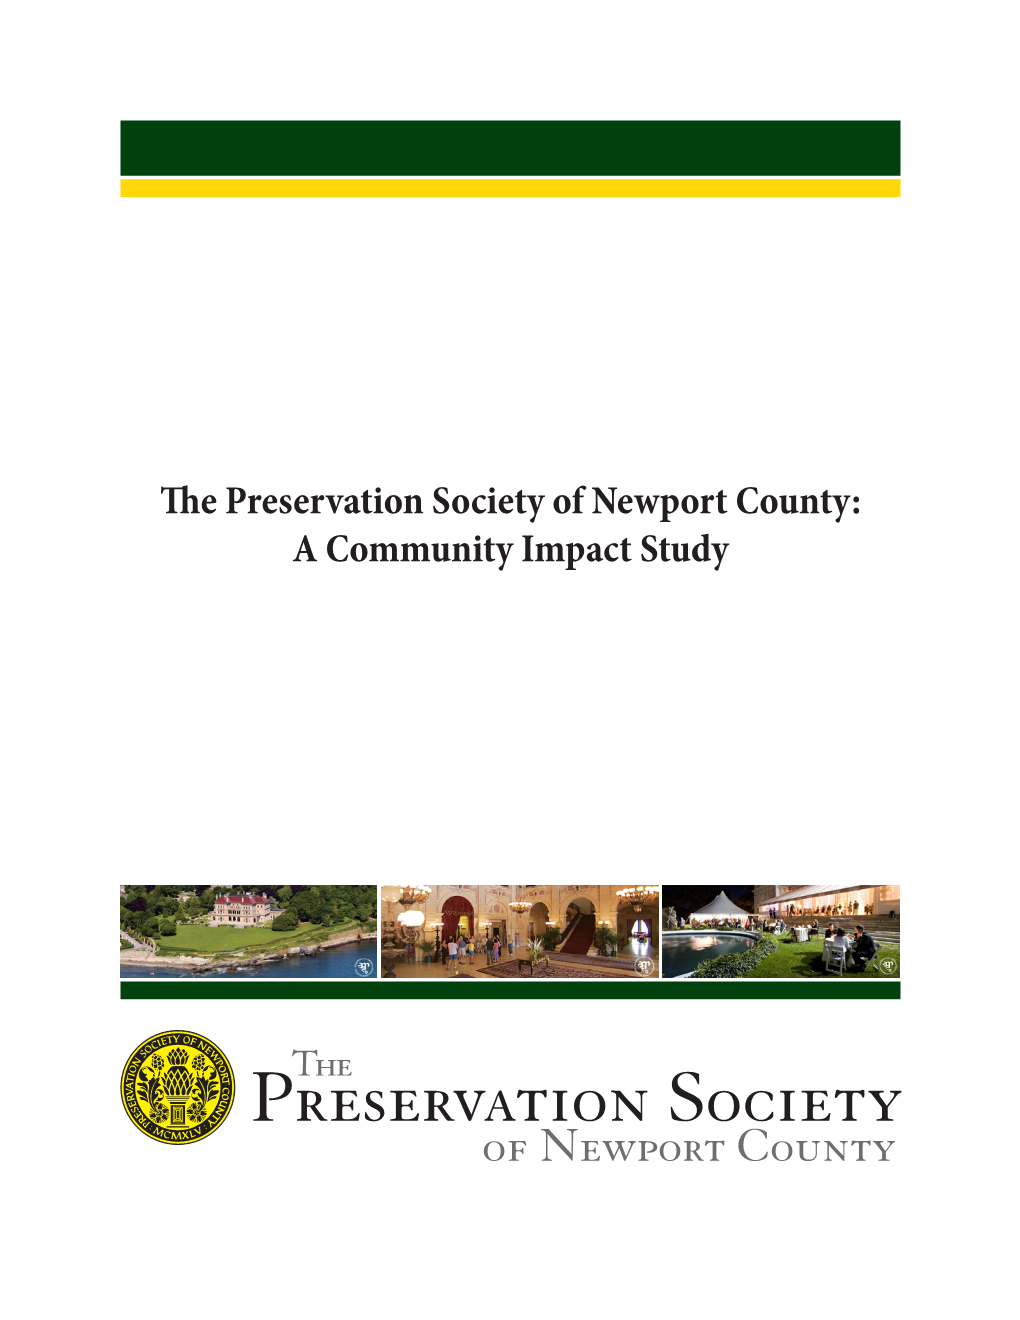 The Preservation Society of Newport County: a Community Impact Study